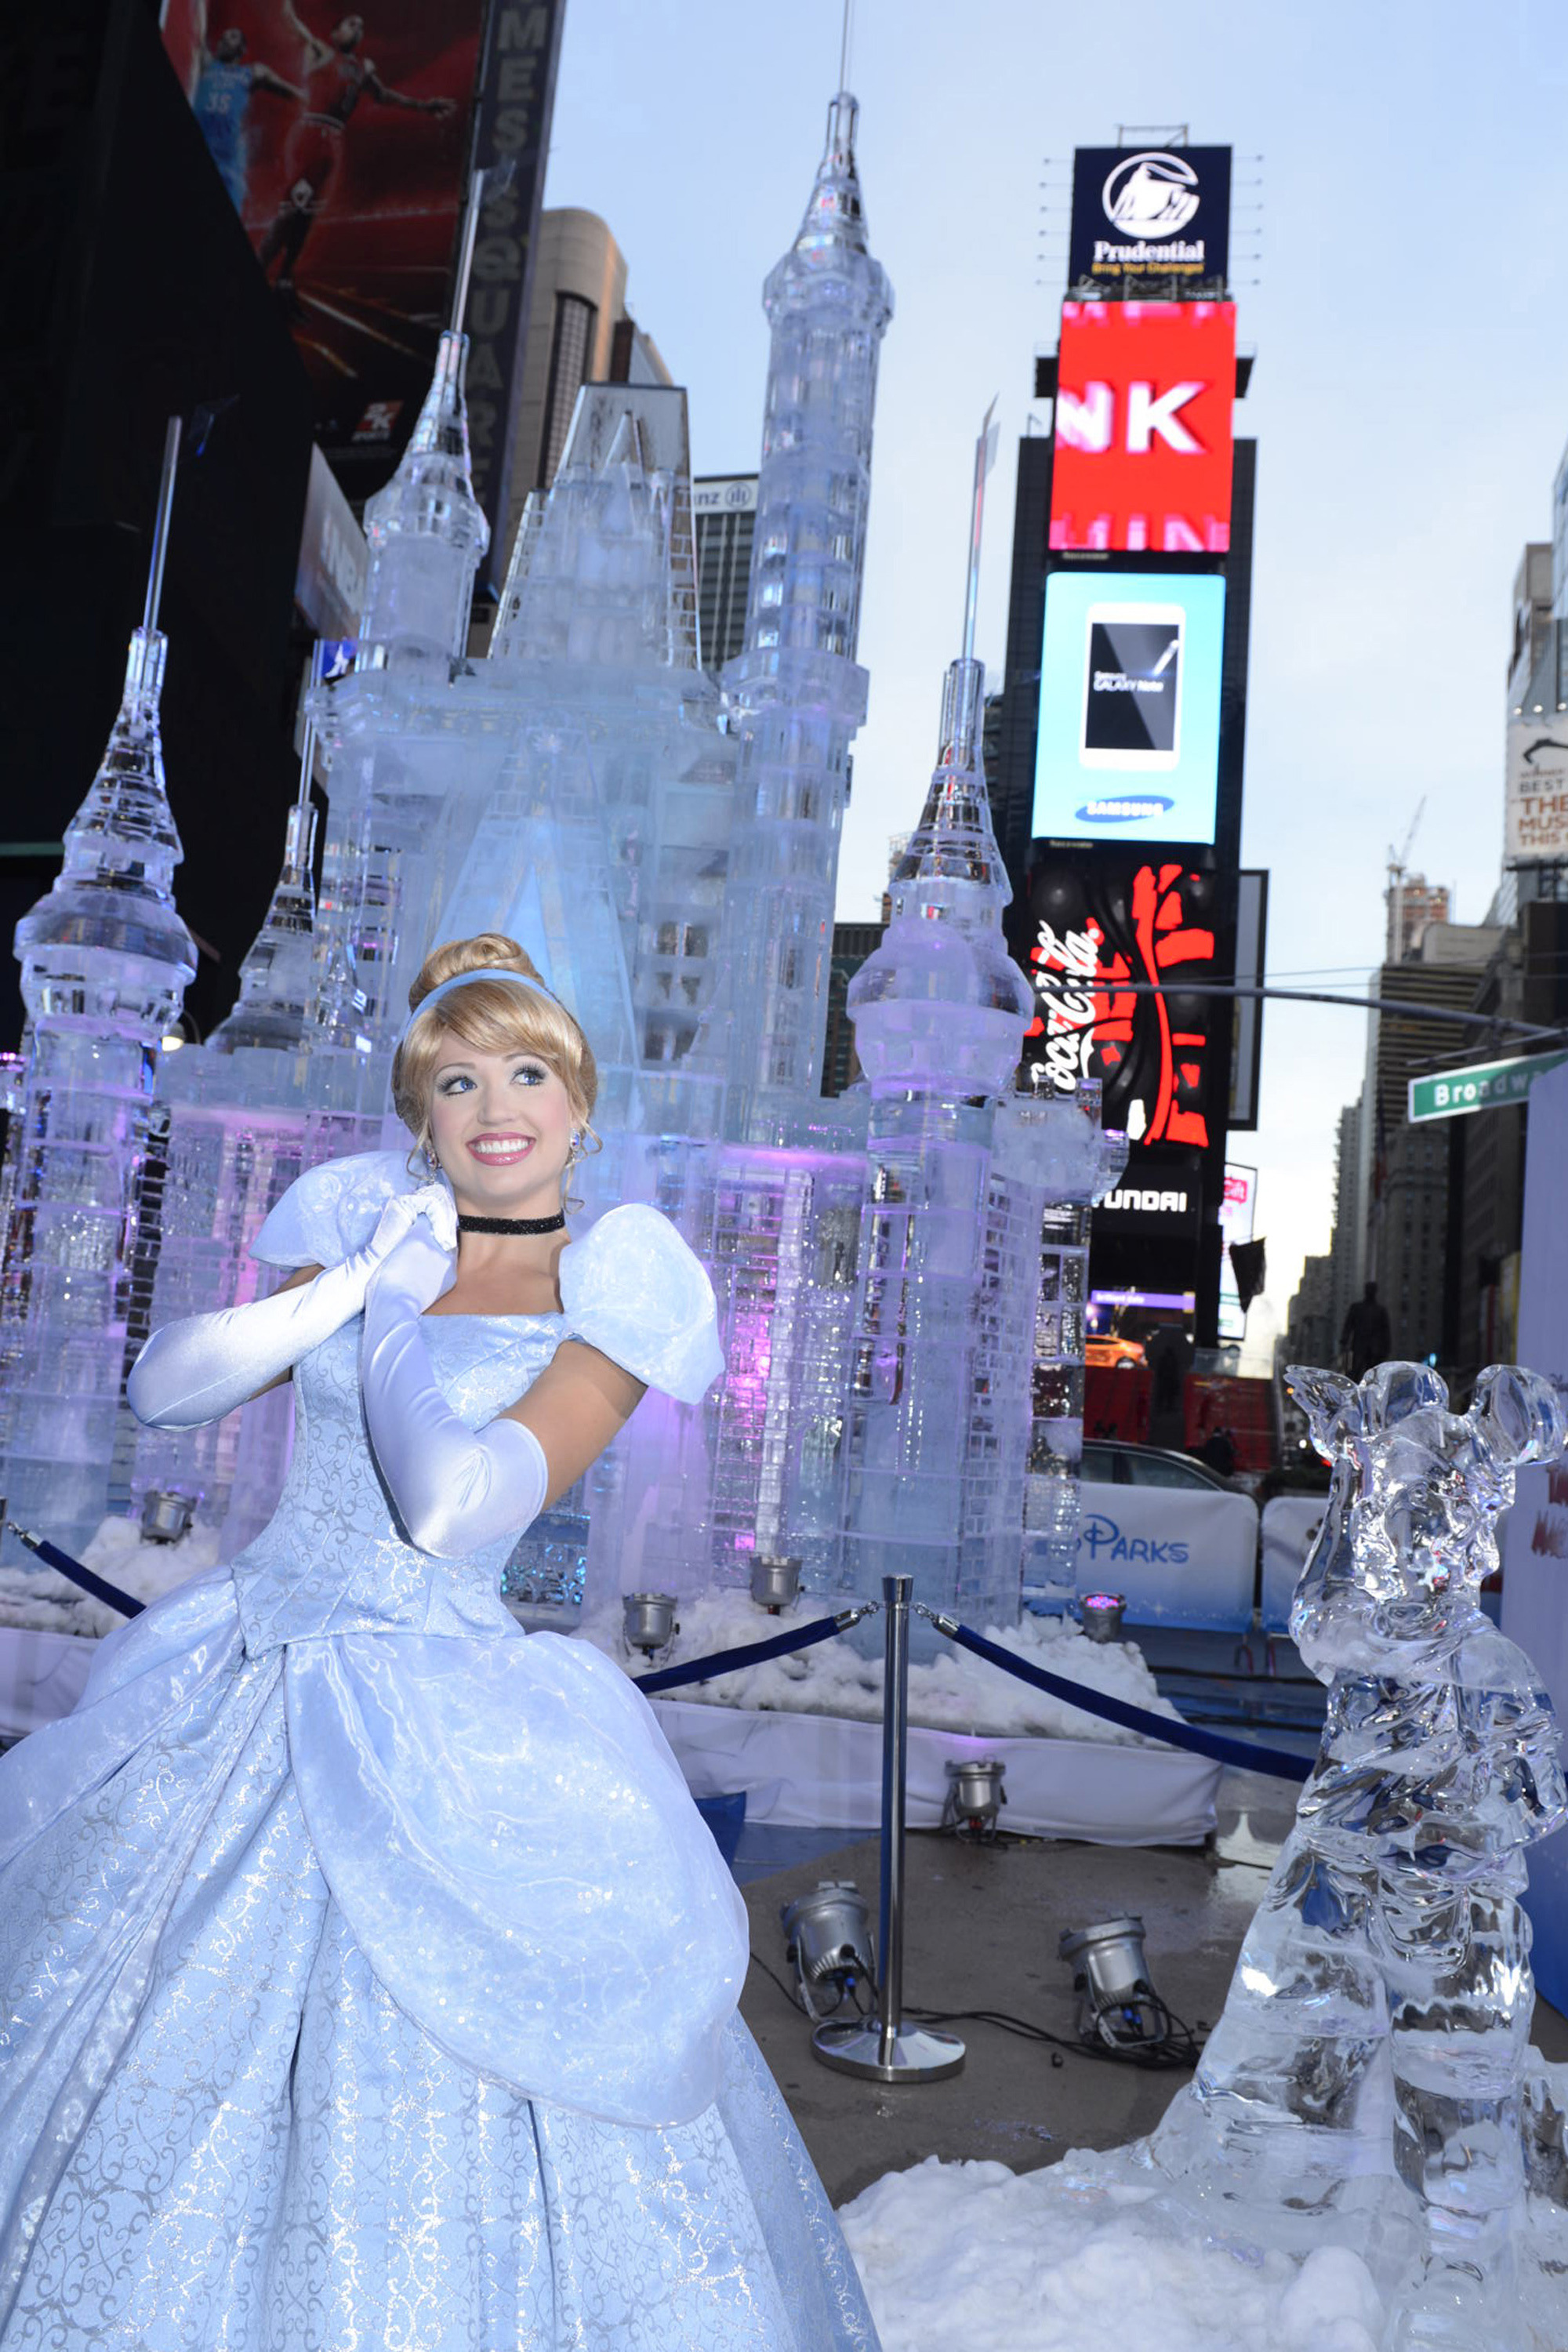 Disney Princess Cinderella poses Oct. 17, 2012 in front of a 25-foot-tall ice castle sculpture in Times Square in New York City.   ( David Roark/Disney Parks via Getty Images) (Handout&mdash;Getty Images)